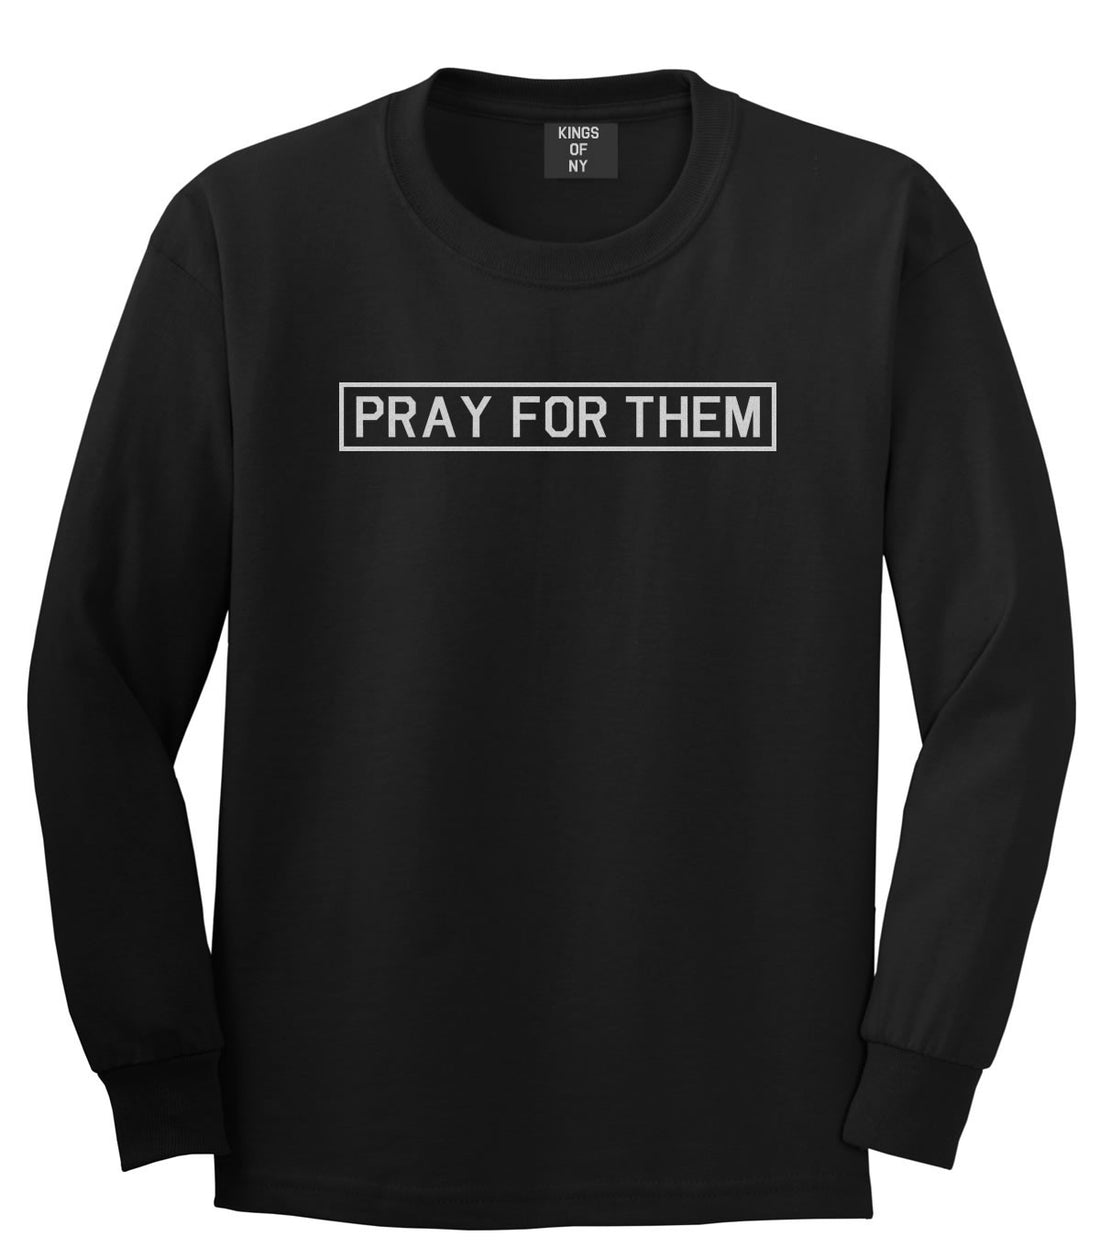 Pray For Them Fall15 Long Sleeve T-Shirt in Black by Kings Of NY